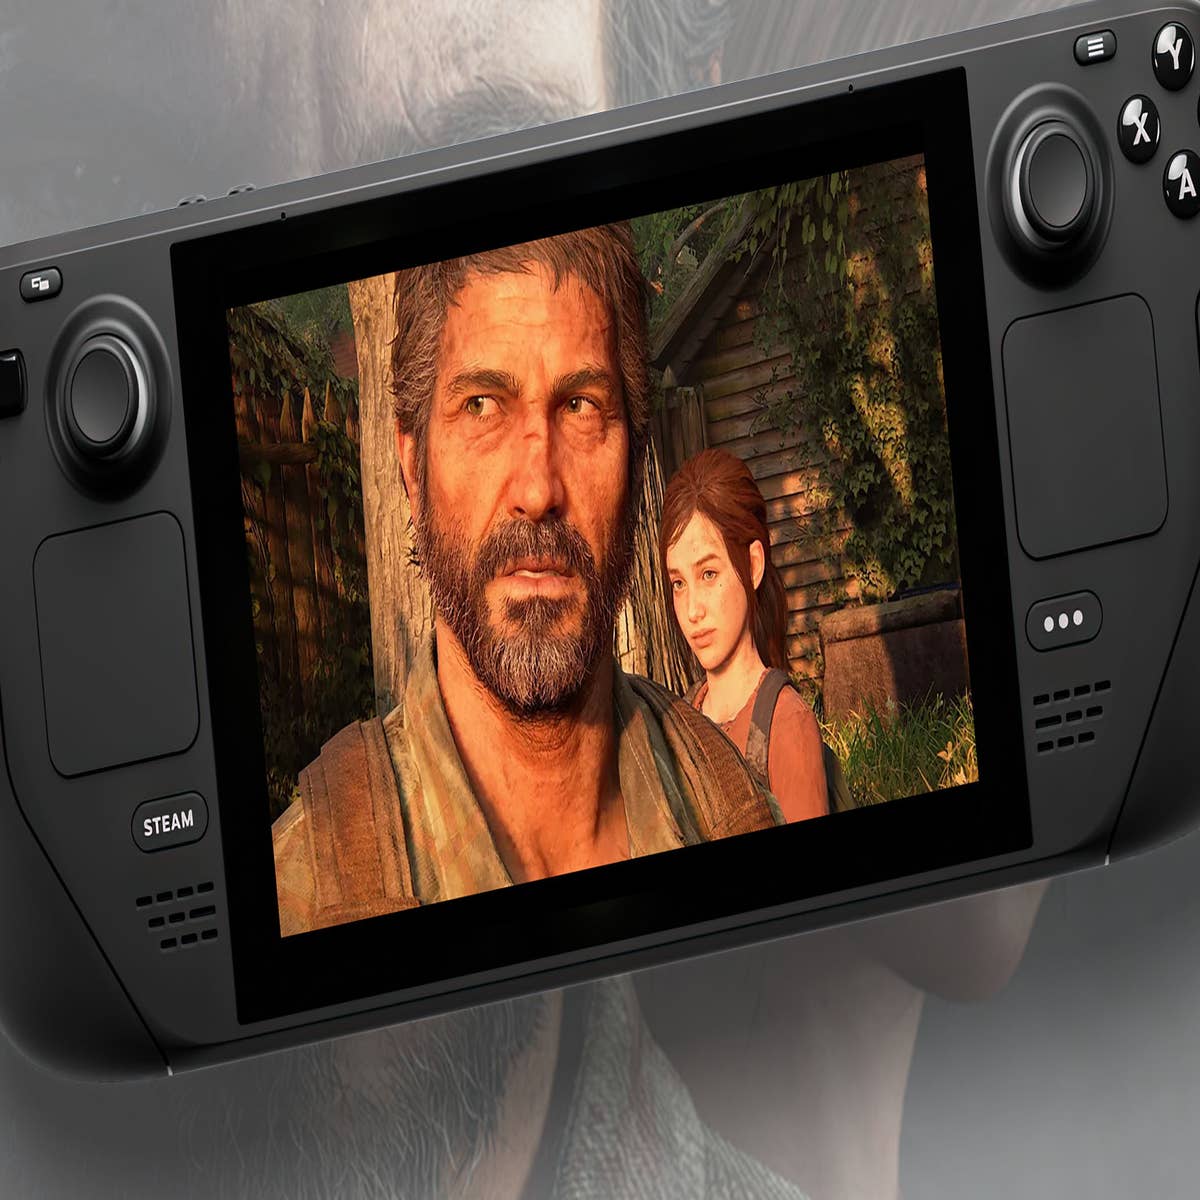 Last of Us Part 1 user reviews call it the “single worst PC port